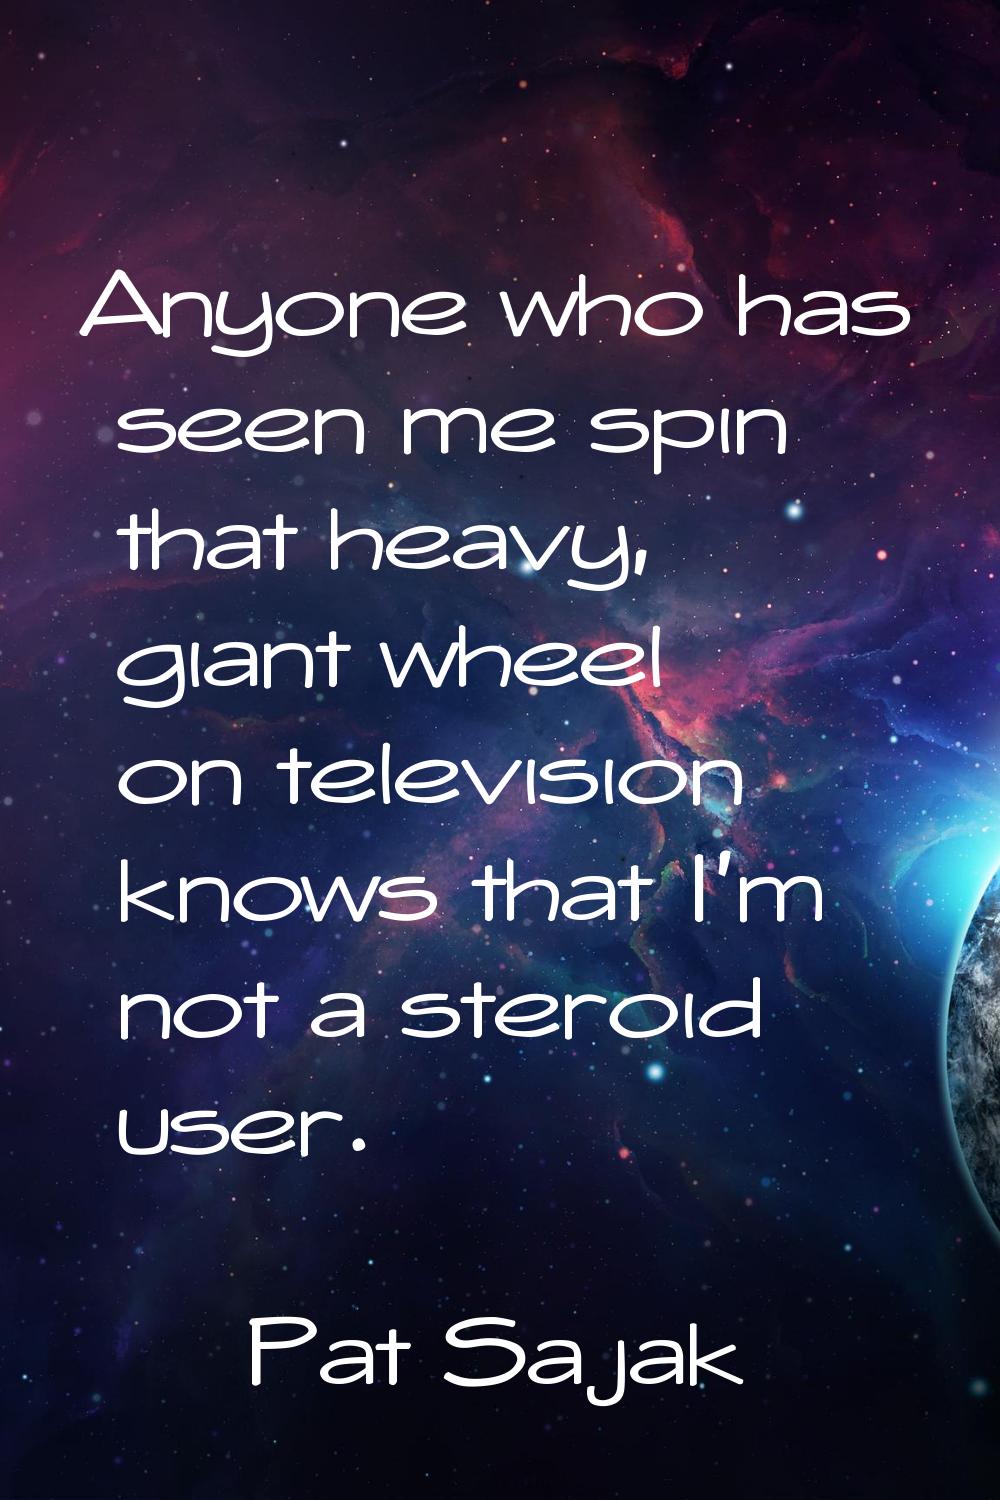 Anyone who has seen me spin that heavy, giant wheel on television knows that I'm not a steroid user